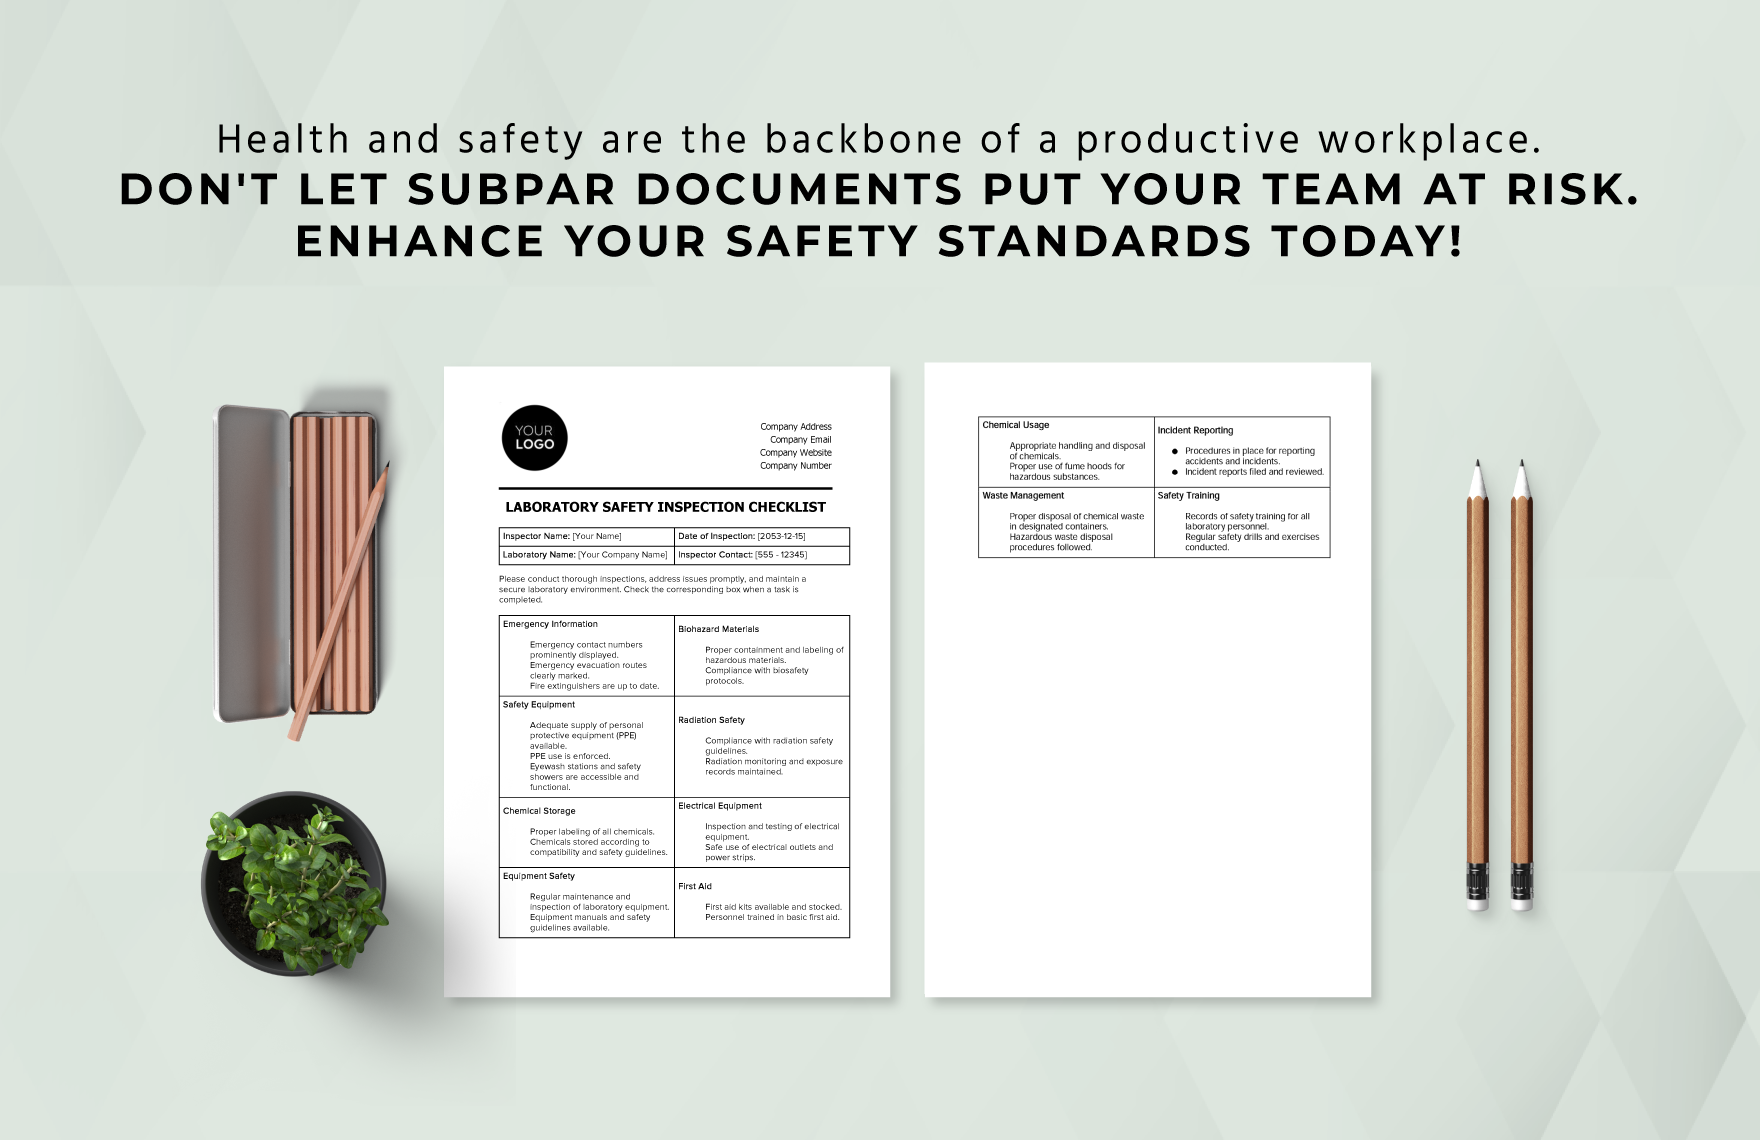 Laboratory Safety Inspection Checklist Template